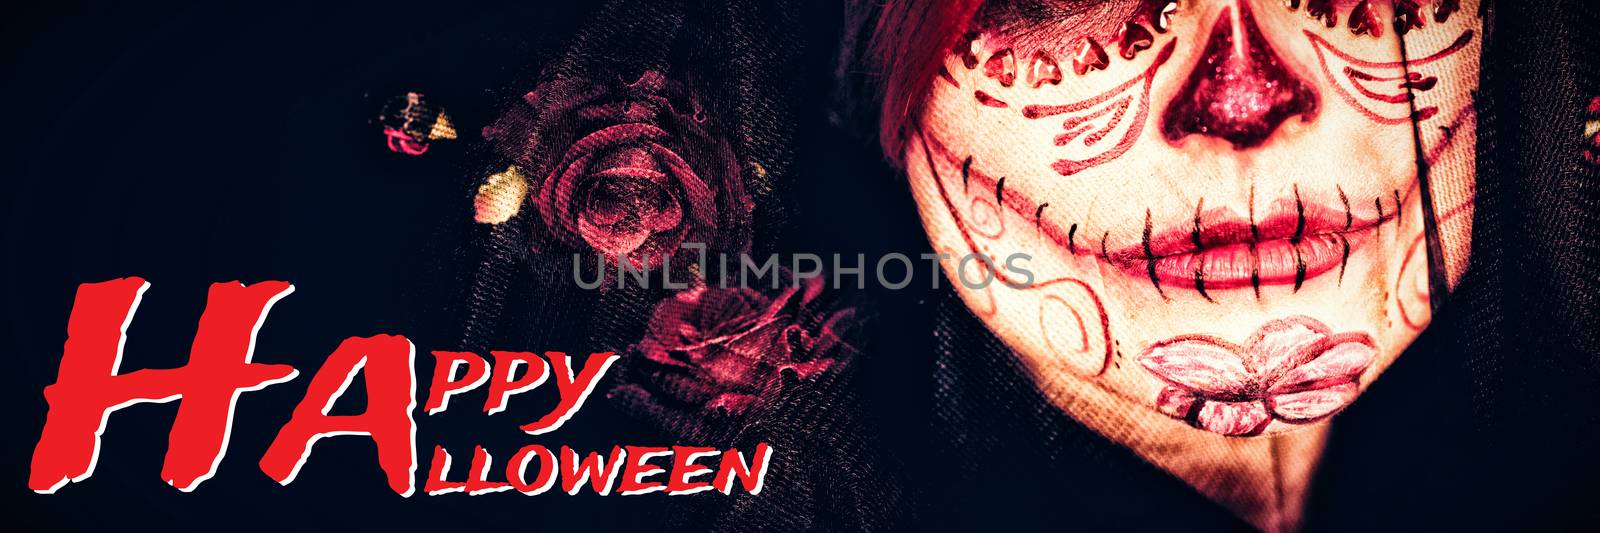 Composite image of graphic image of happy halloween text by Wavebreakmedia